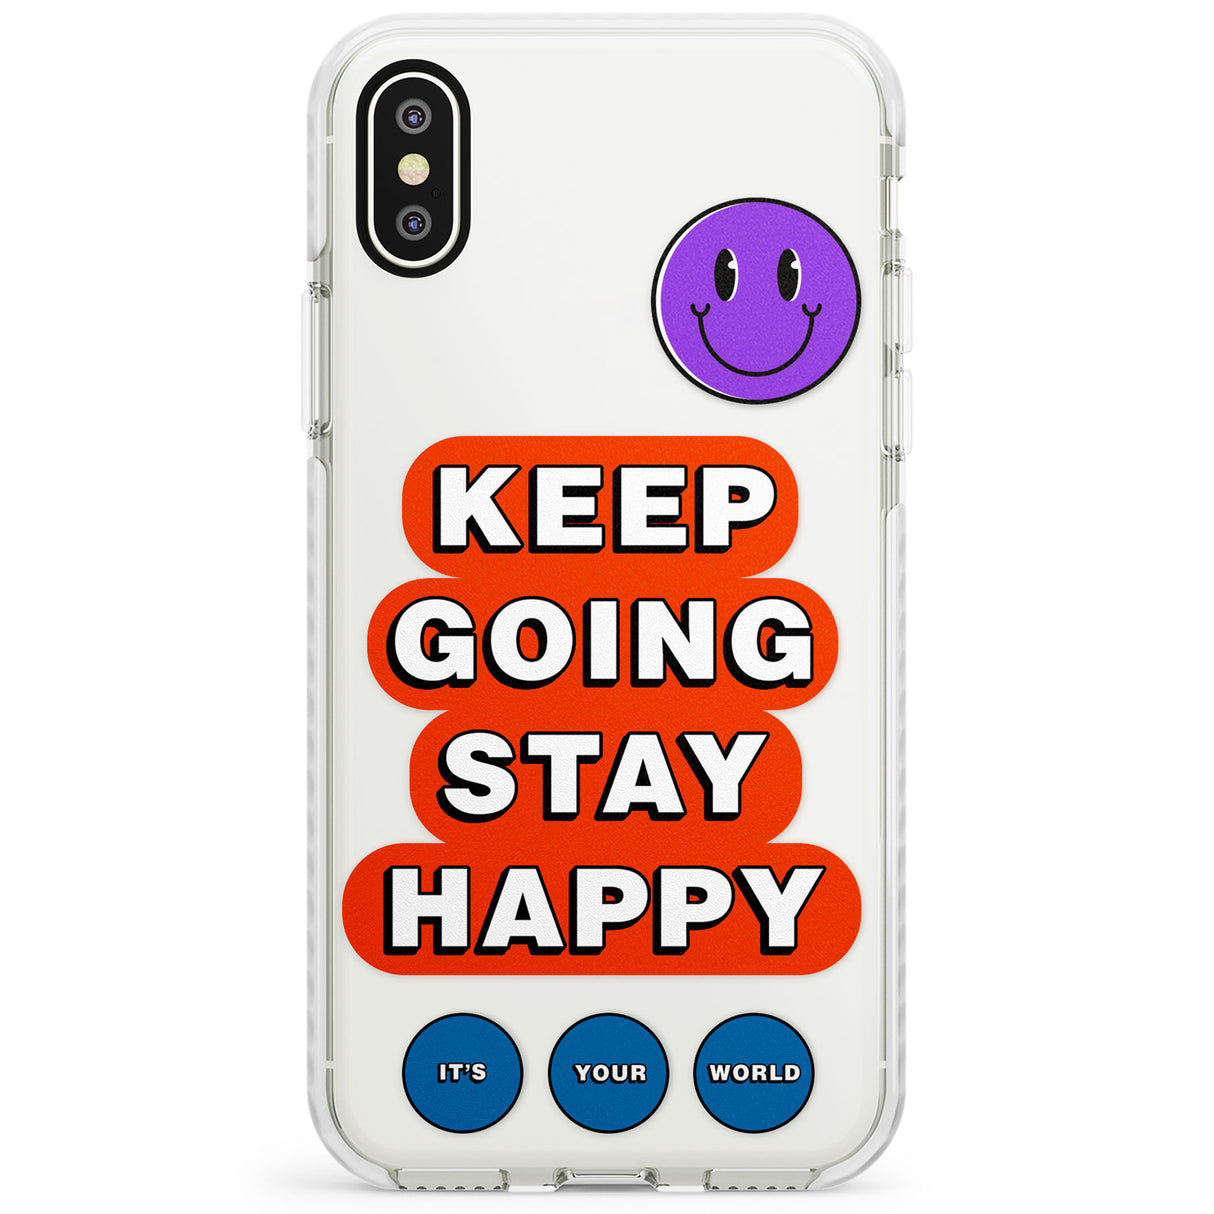 Keep Going Stay Happy Impact Phone Case for iPhone X XS Max XR